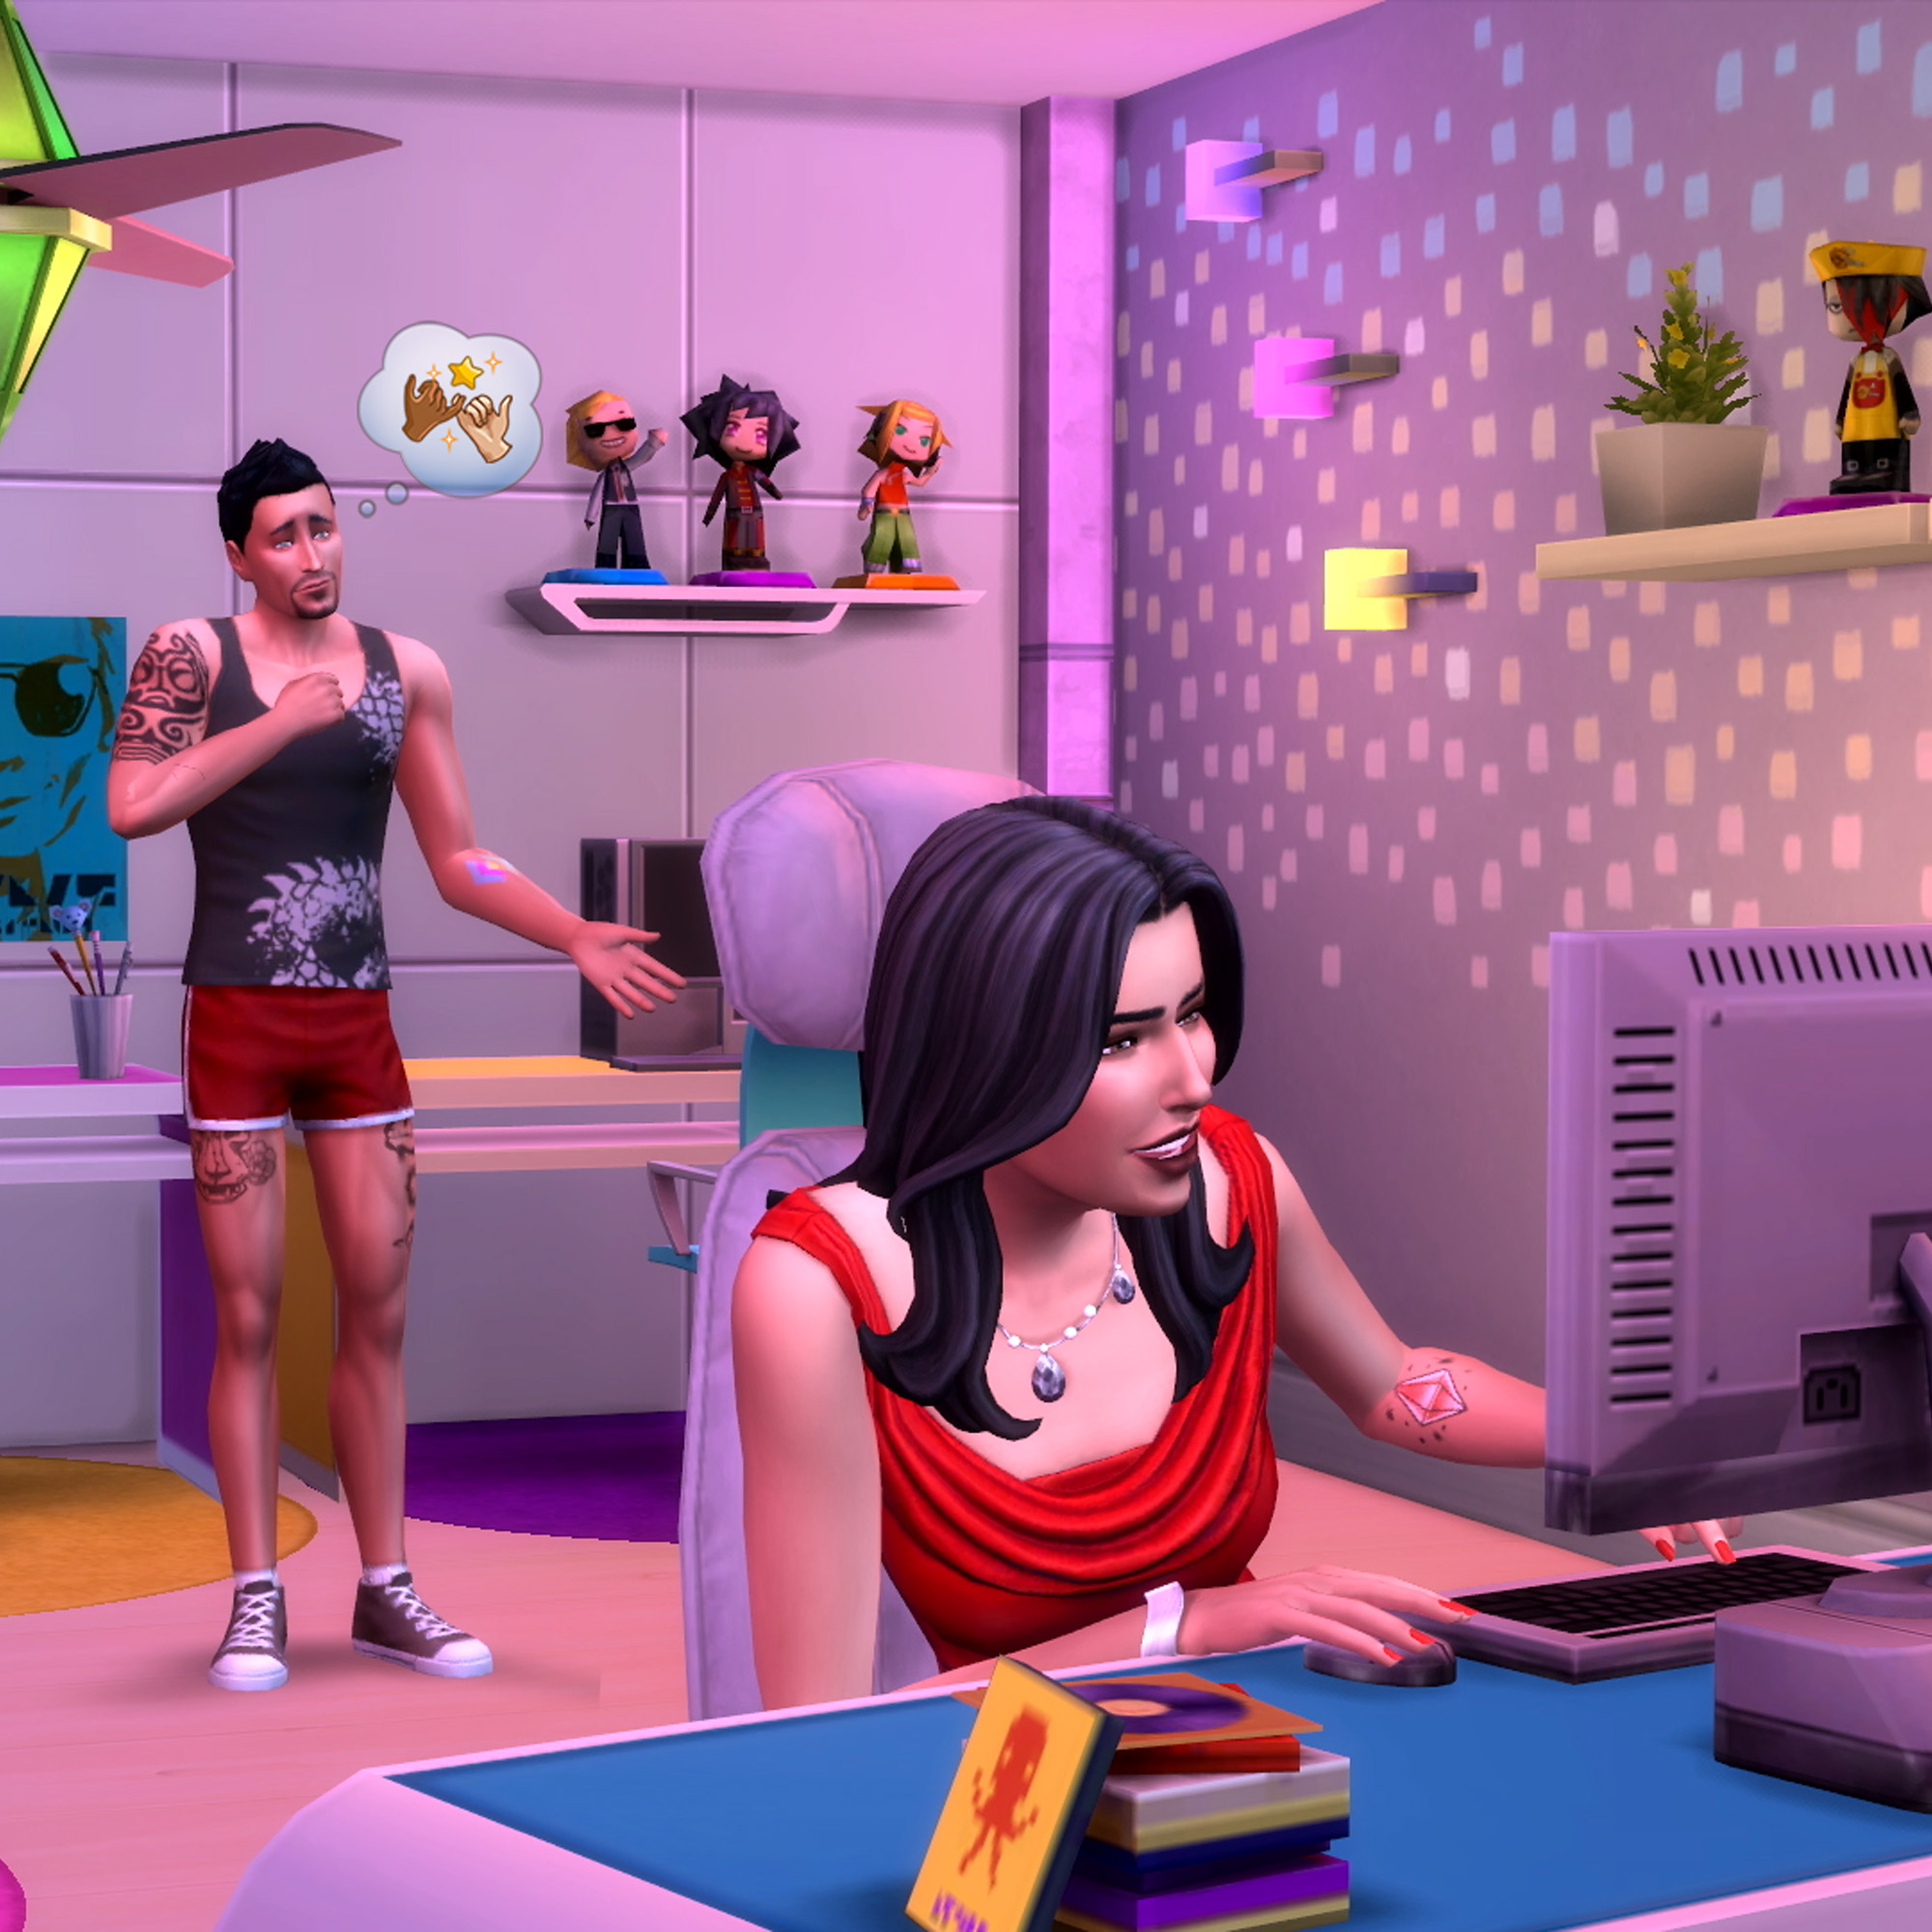 A Sim playing games on a computer while another Sim stands behind her looking sad.